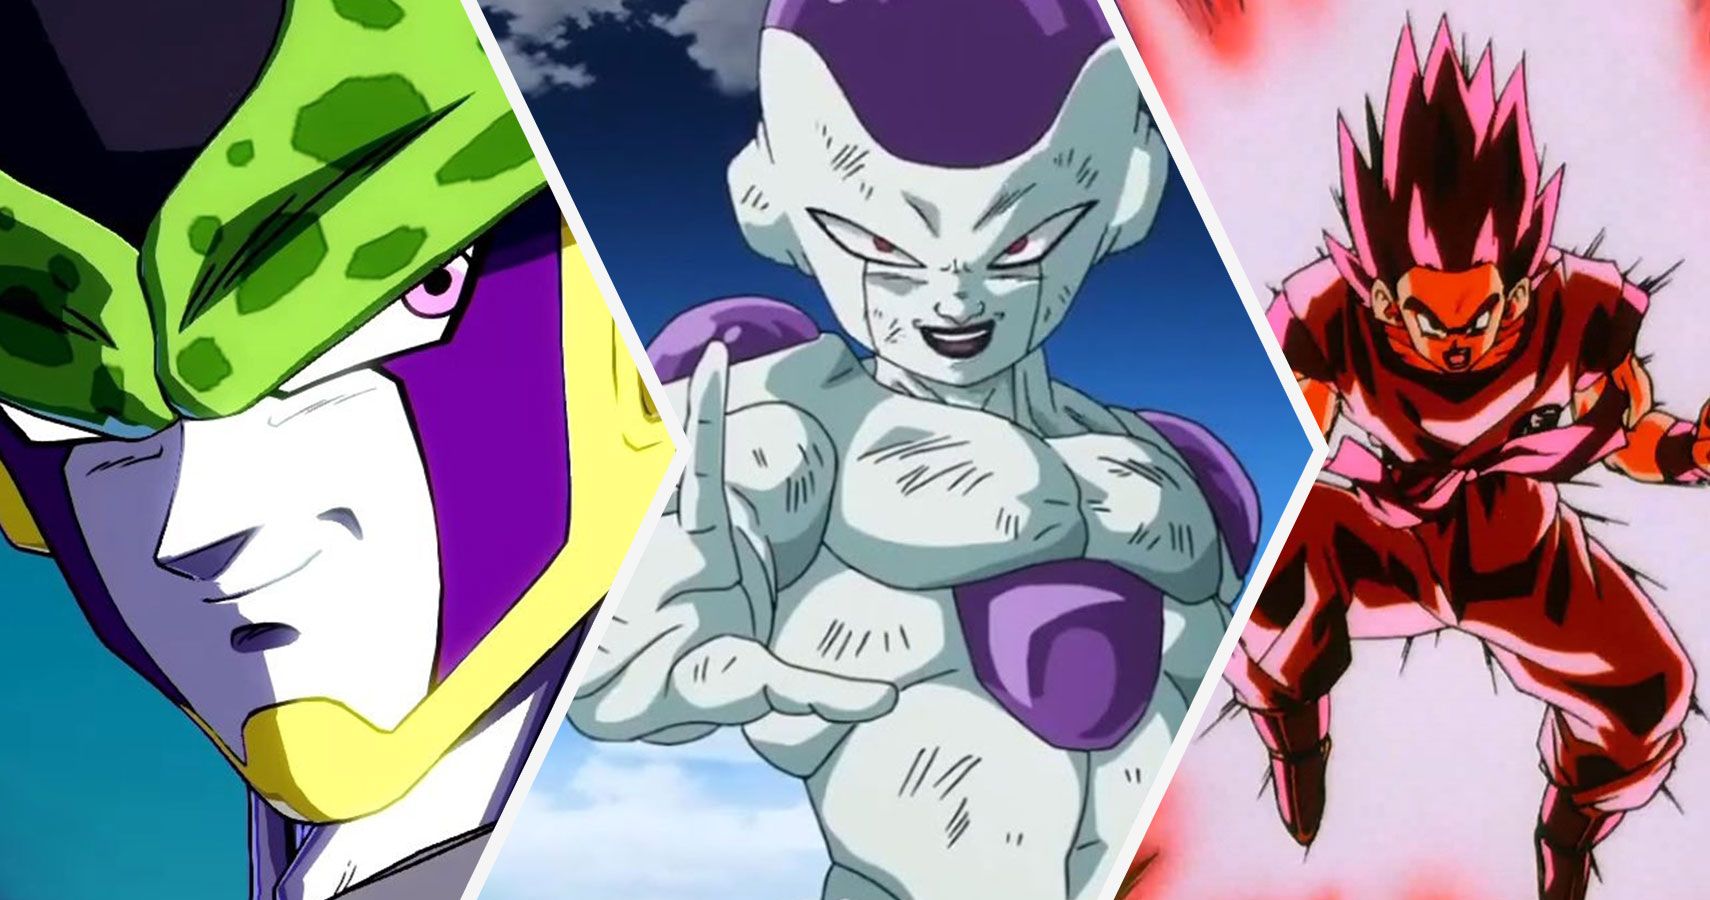 Who Is Dragon Ball's Most Powerful Henchman?